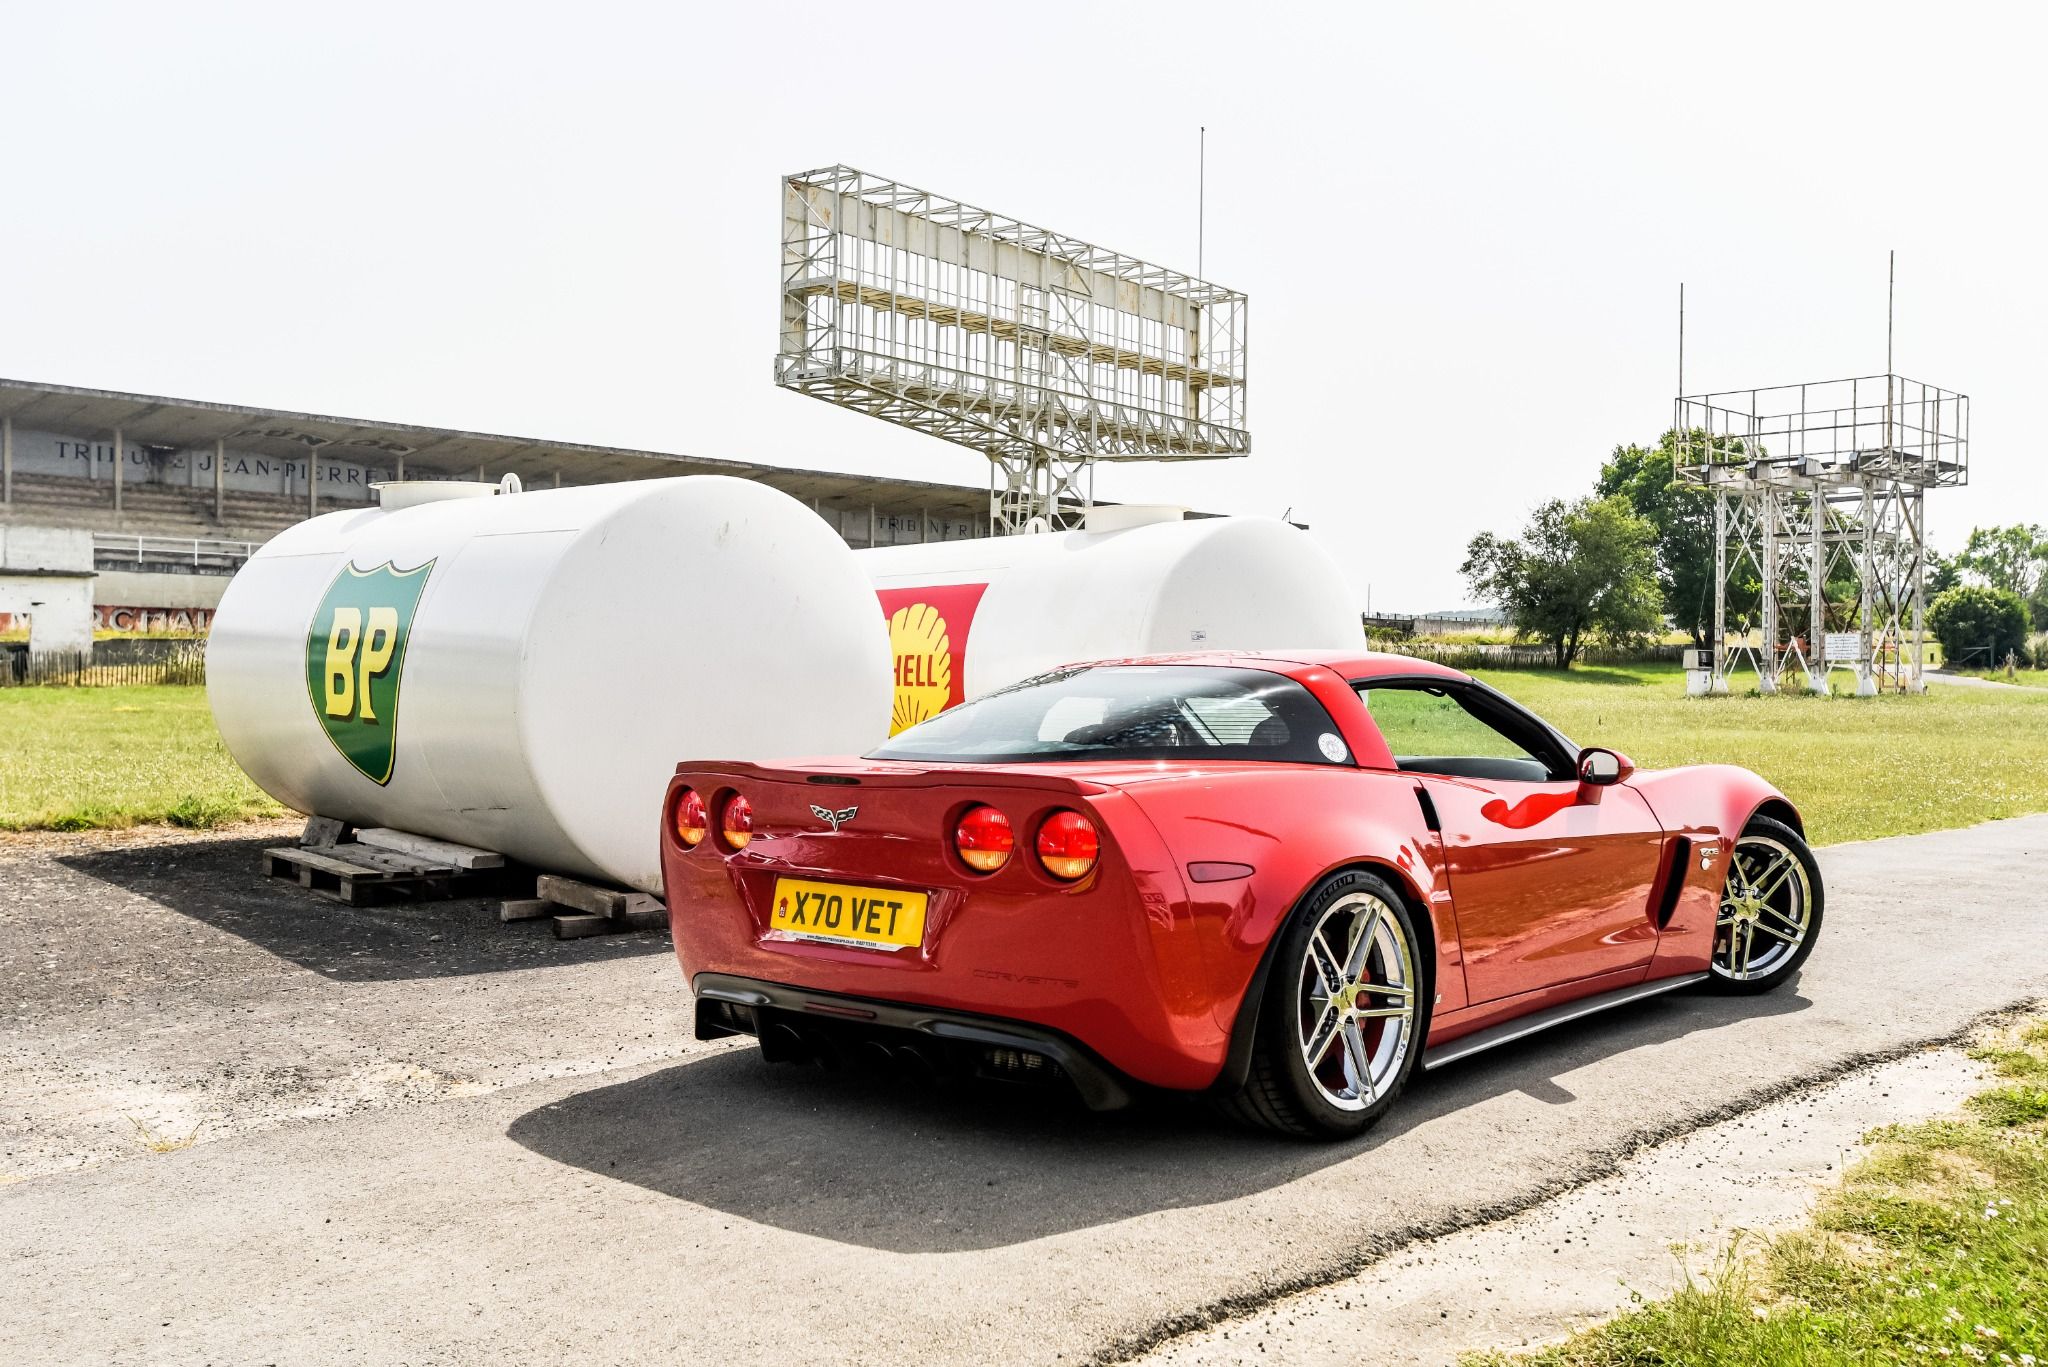 A red sports car next to fueling tanks at an old race track